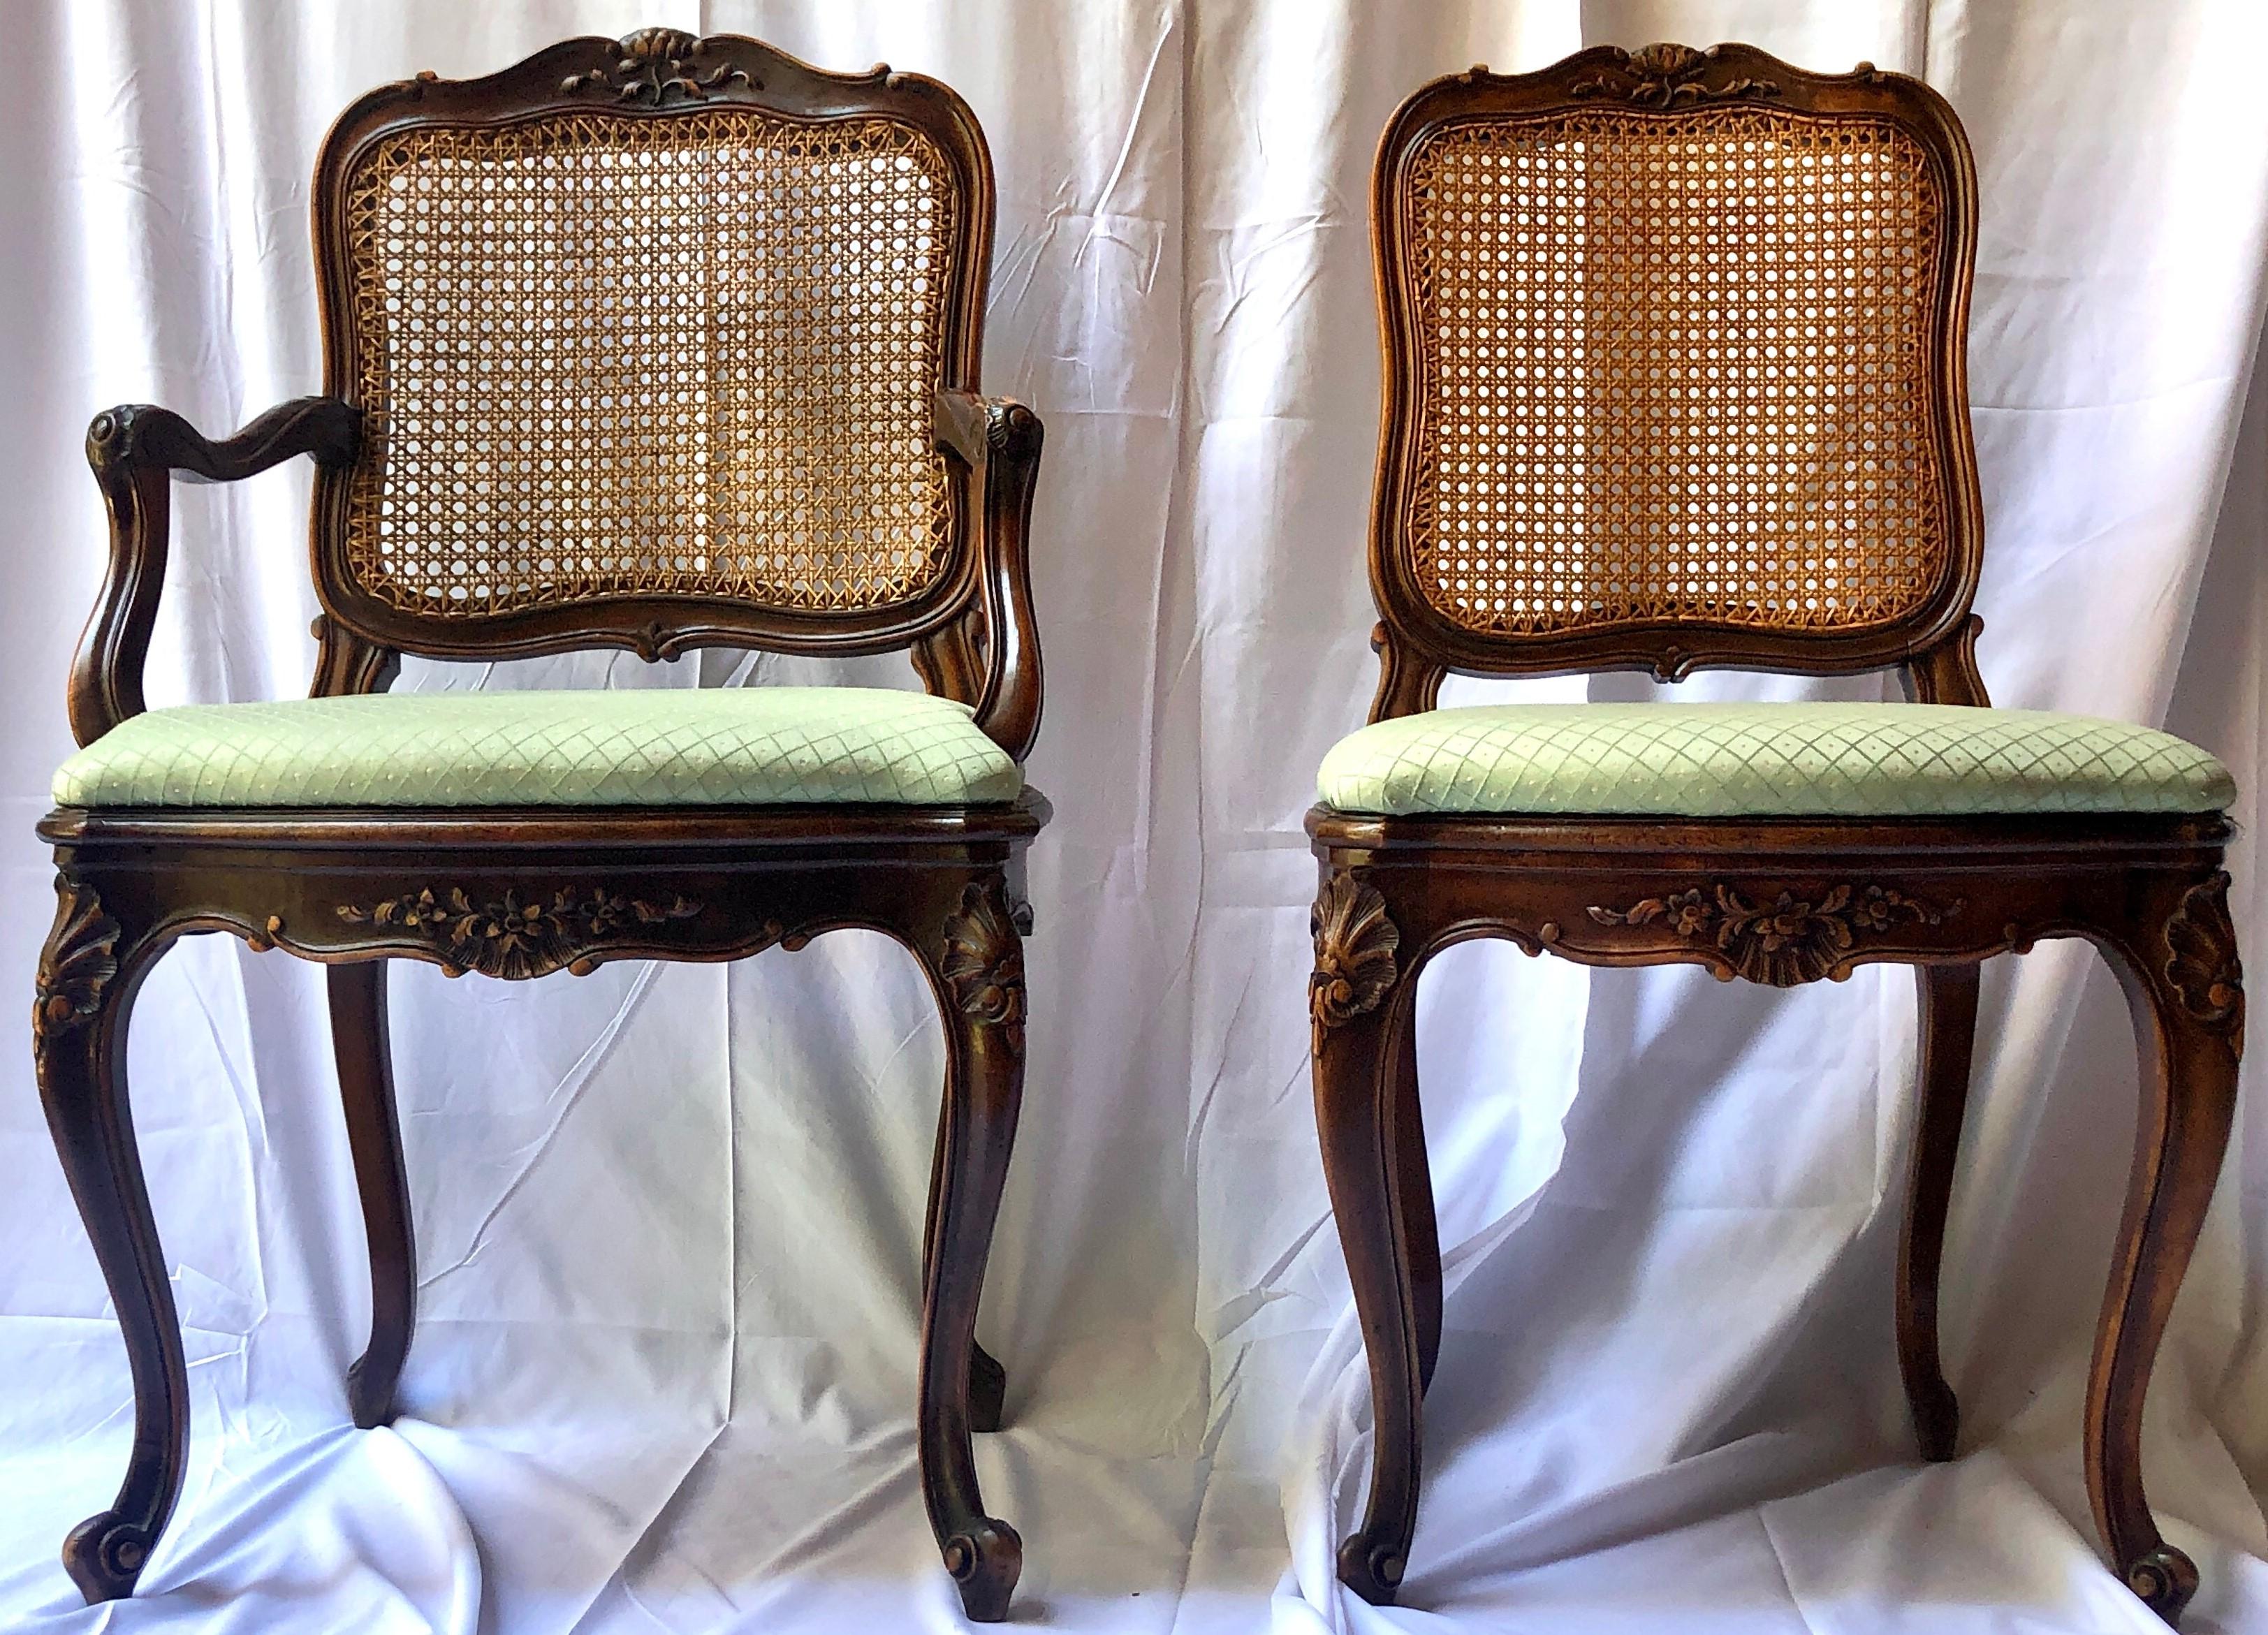 Set of 6 Estate French hand-carved walnut and cane-back dining chairs with green upholstered seats, circa 1940's.
Measures: Arm chair: height - 39 inches, width - 22 1/2 inches, depth - 20 inches
Seat height: 21